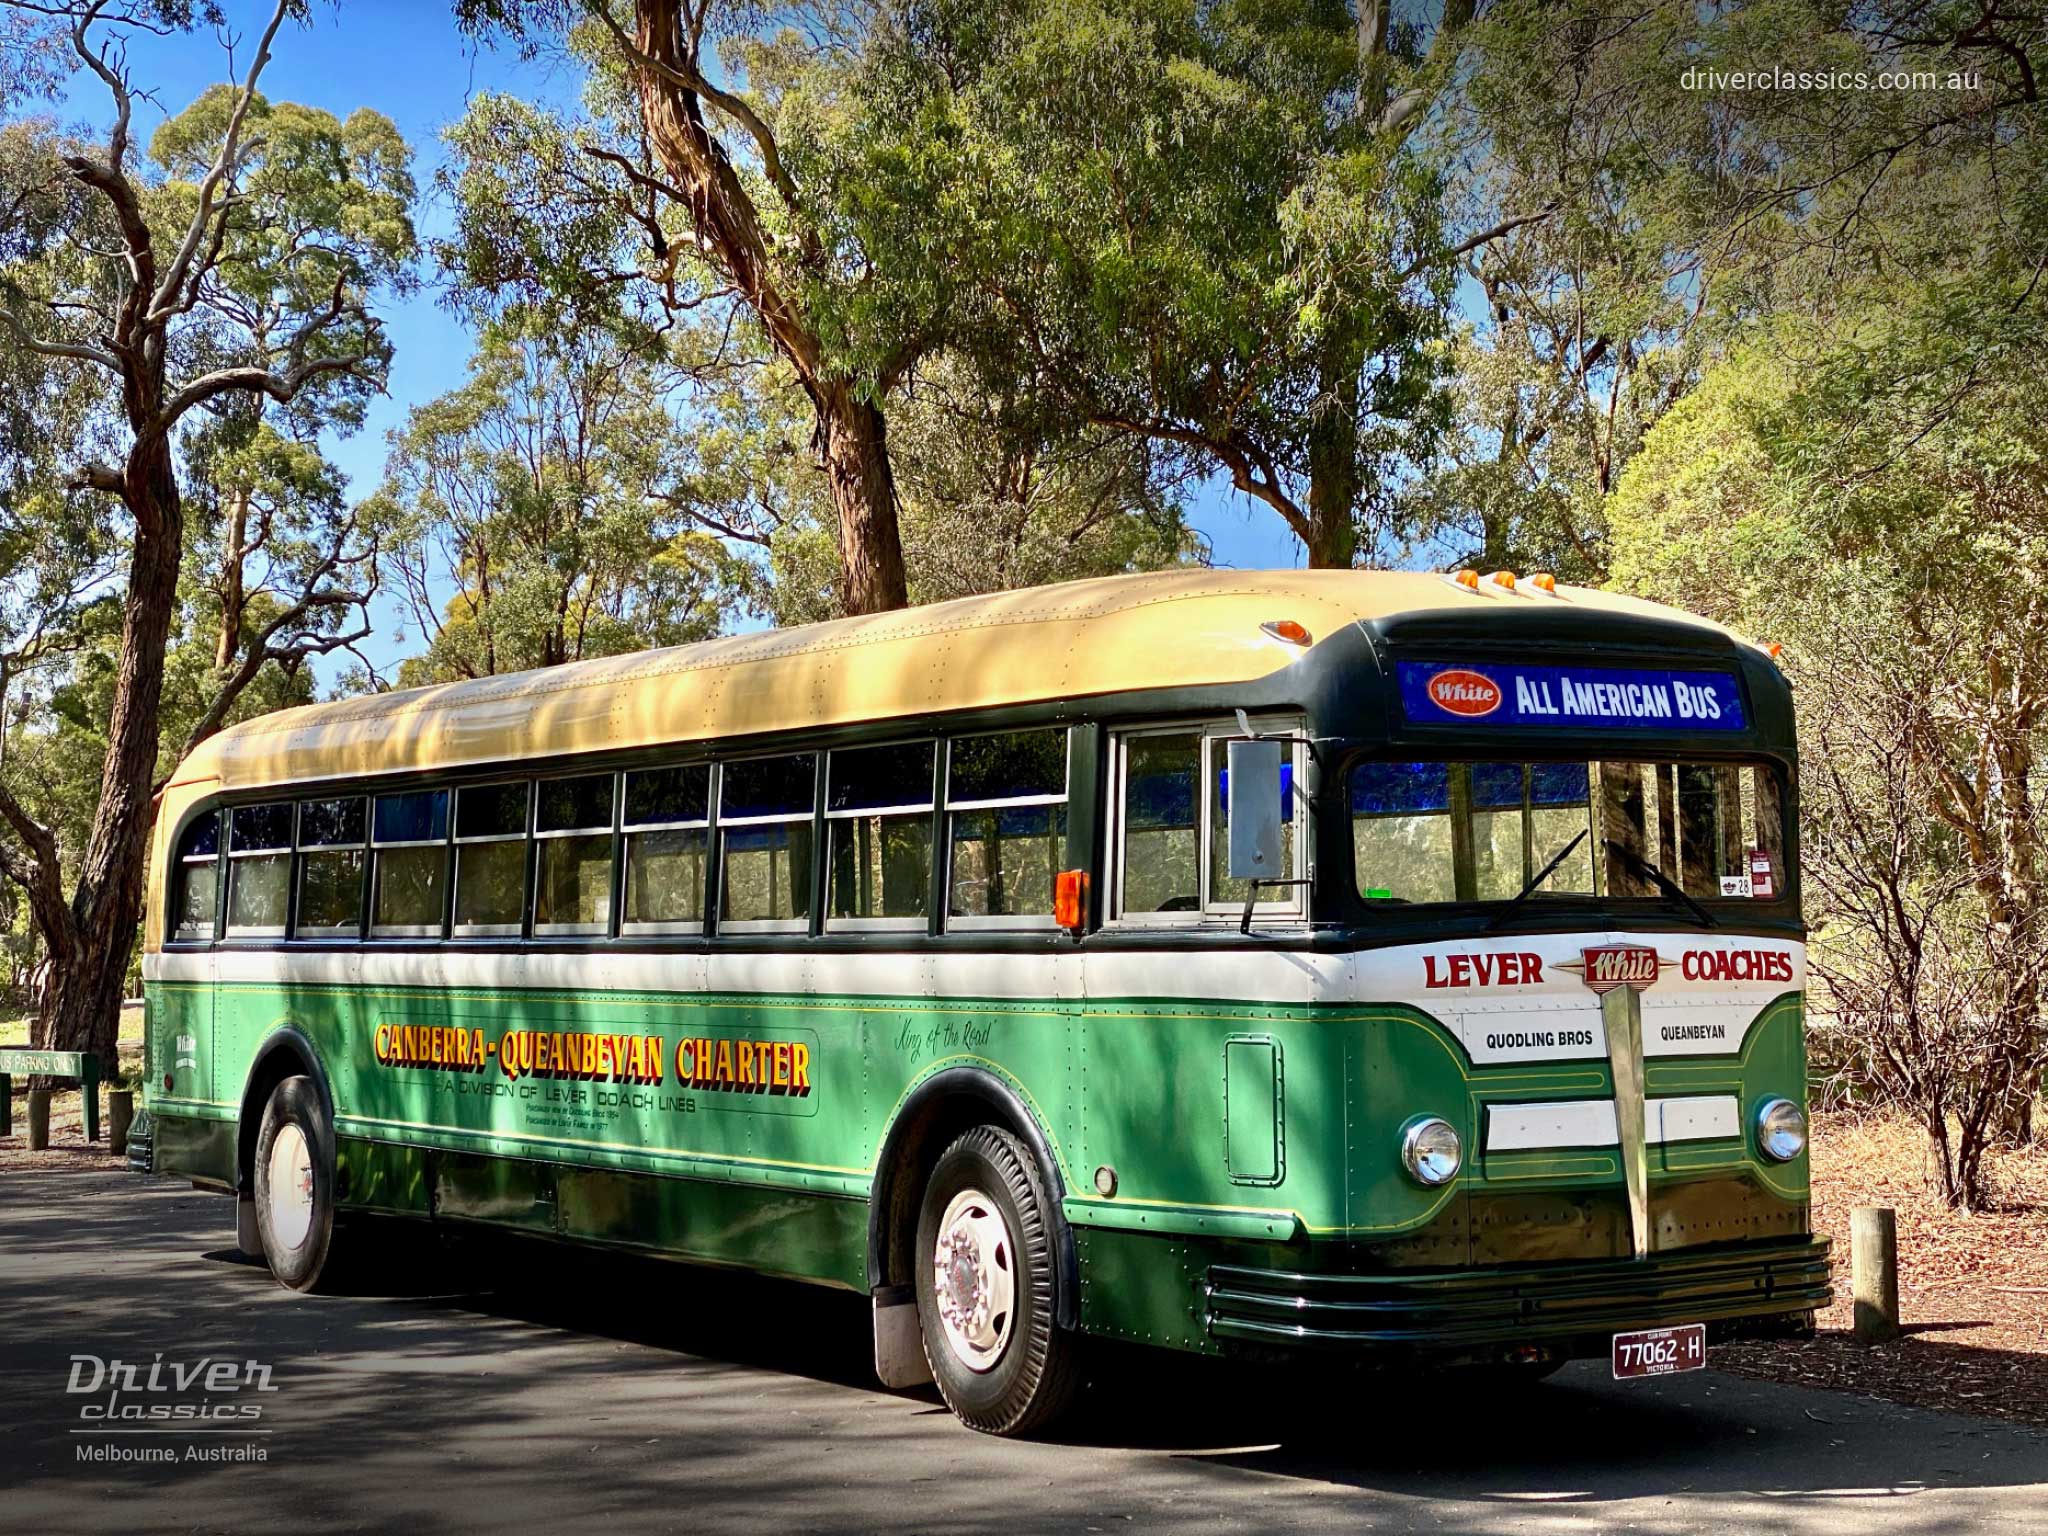 1948 White 798-12 bus, Front and Side, Jells Park VIC, Photo Taken January 2020